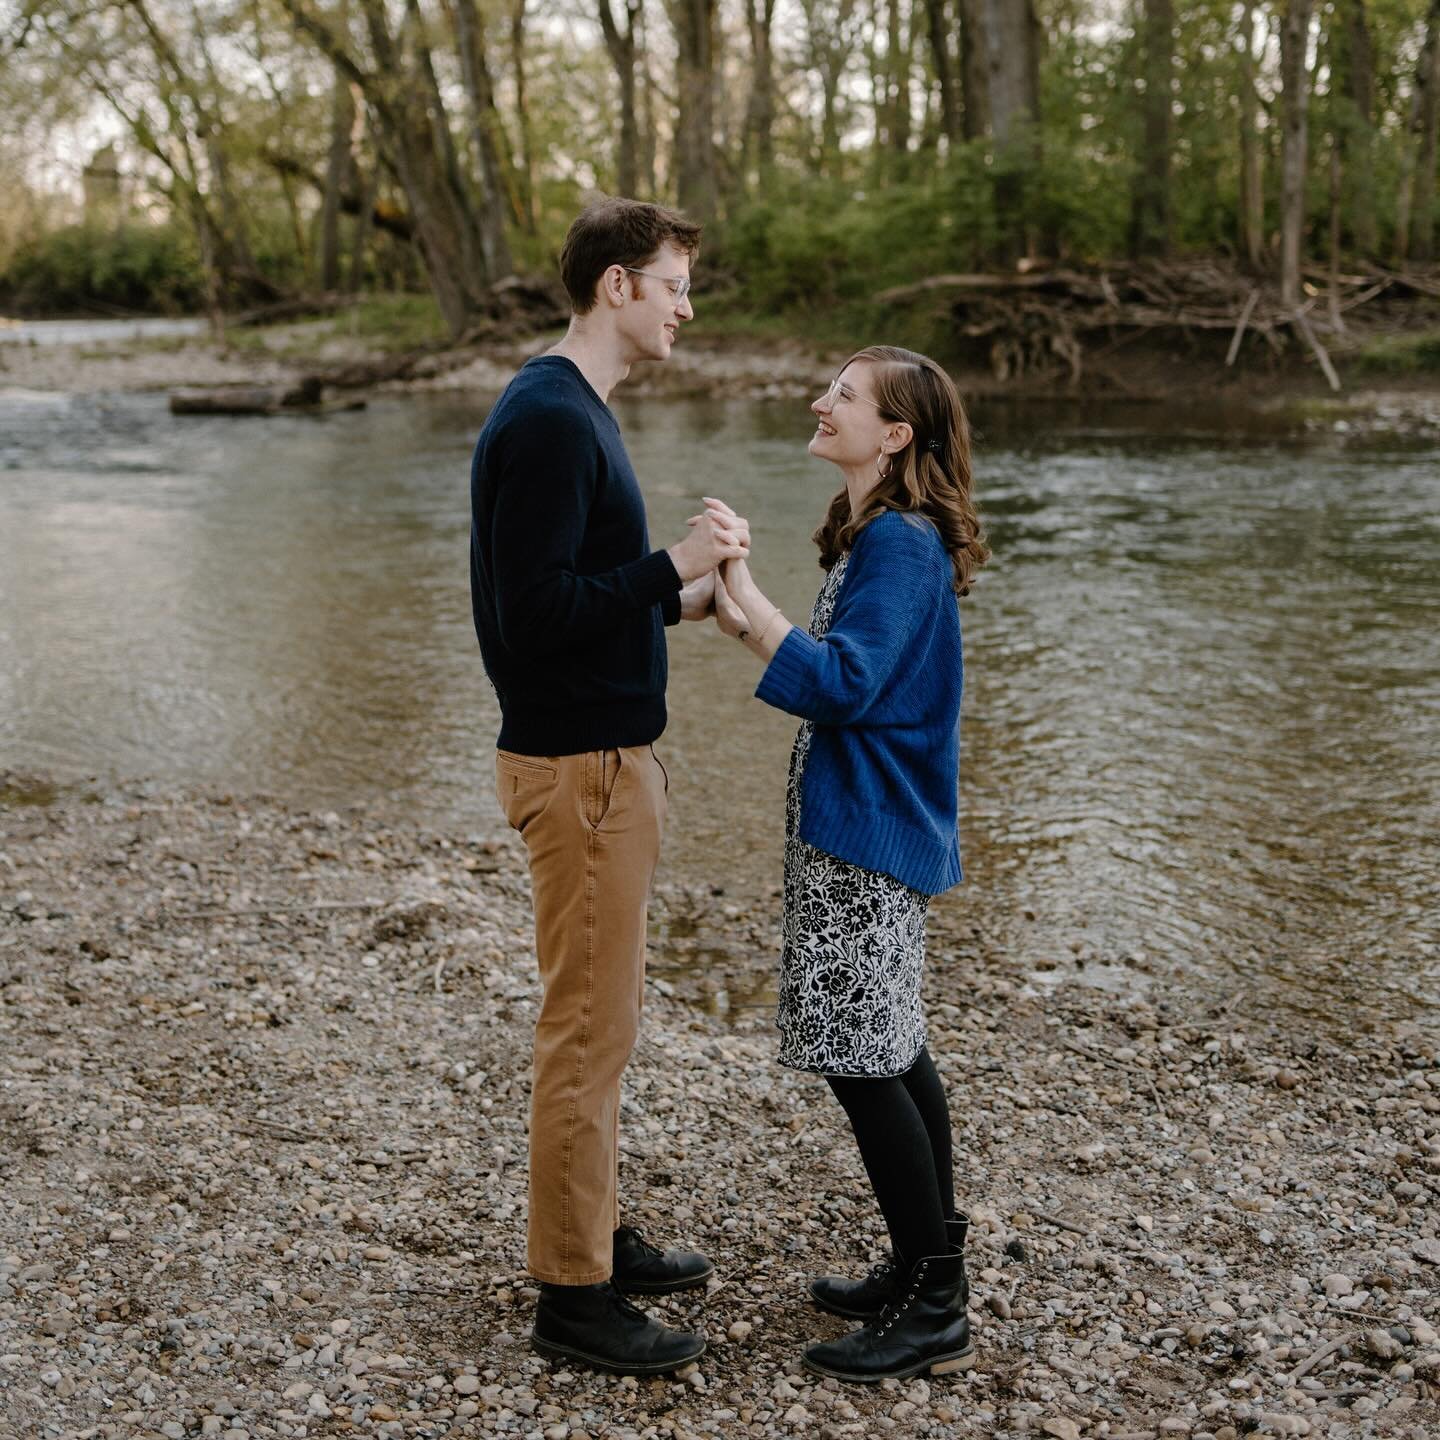 Allison &amp; Rick✨

My last 2024 engagement session! I made my way to one of my favorite Muncie locations, Marrow&rsquo;s Meadow, to capture Allison &amp; Rick. We looked for seashells, snuggled pups, and walked through fields of small wildflowers. 